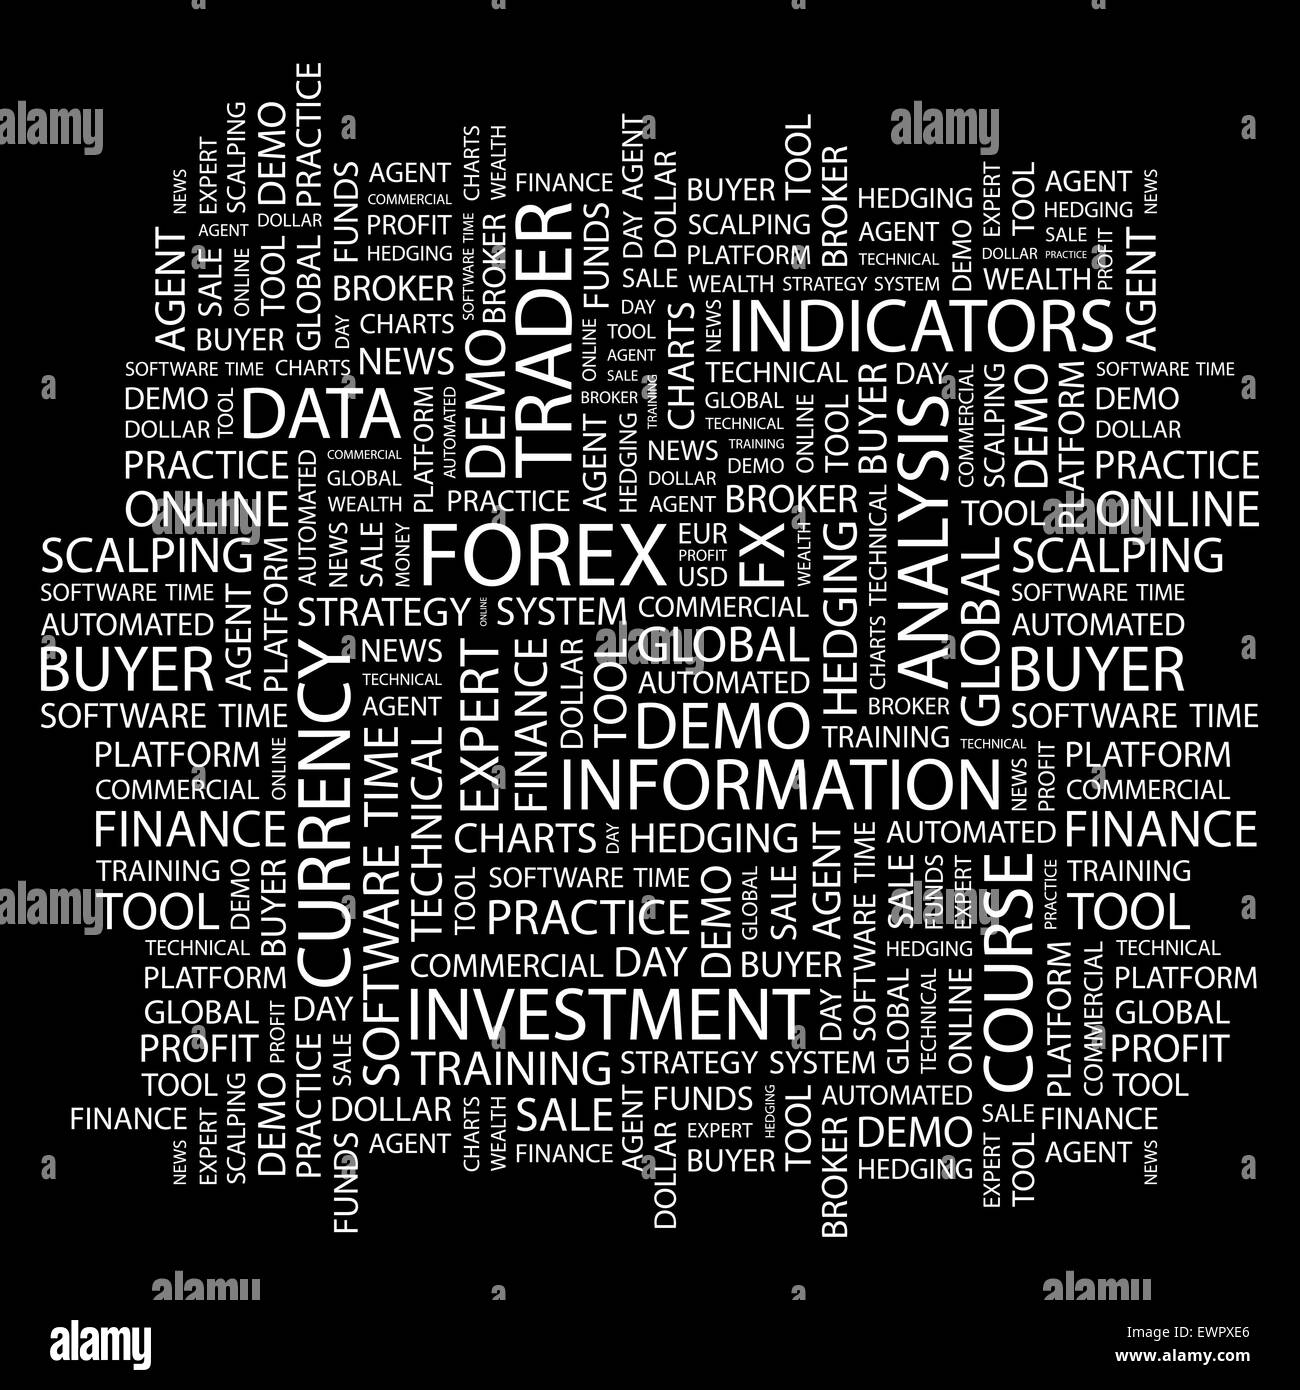 FOREX. Word cloud illustration. Tag cloud concept collage ...